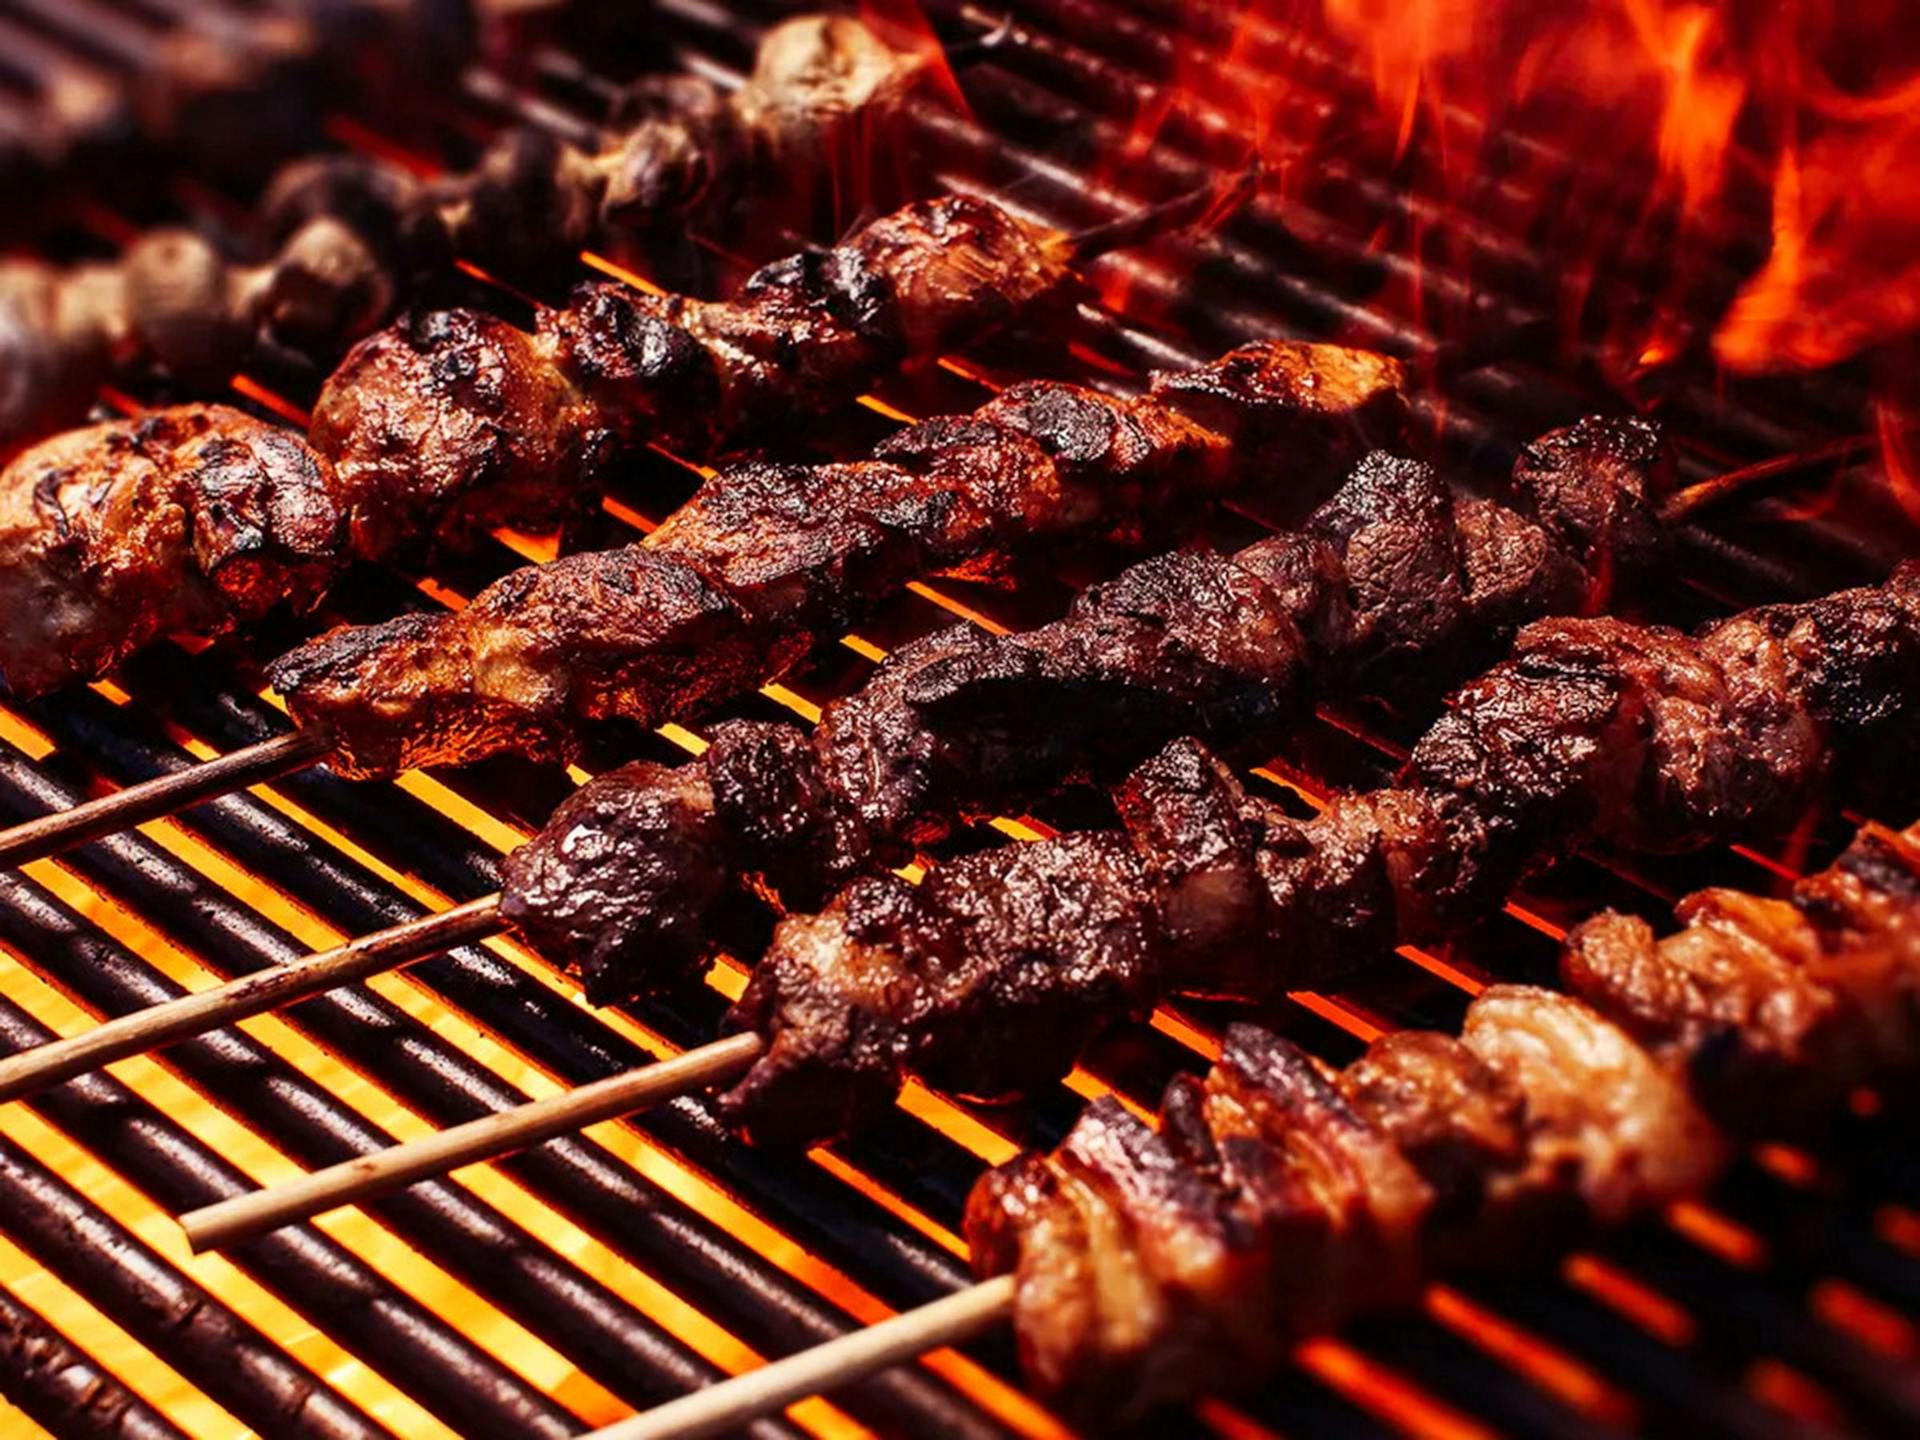 Meat sticks on a grill with fire